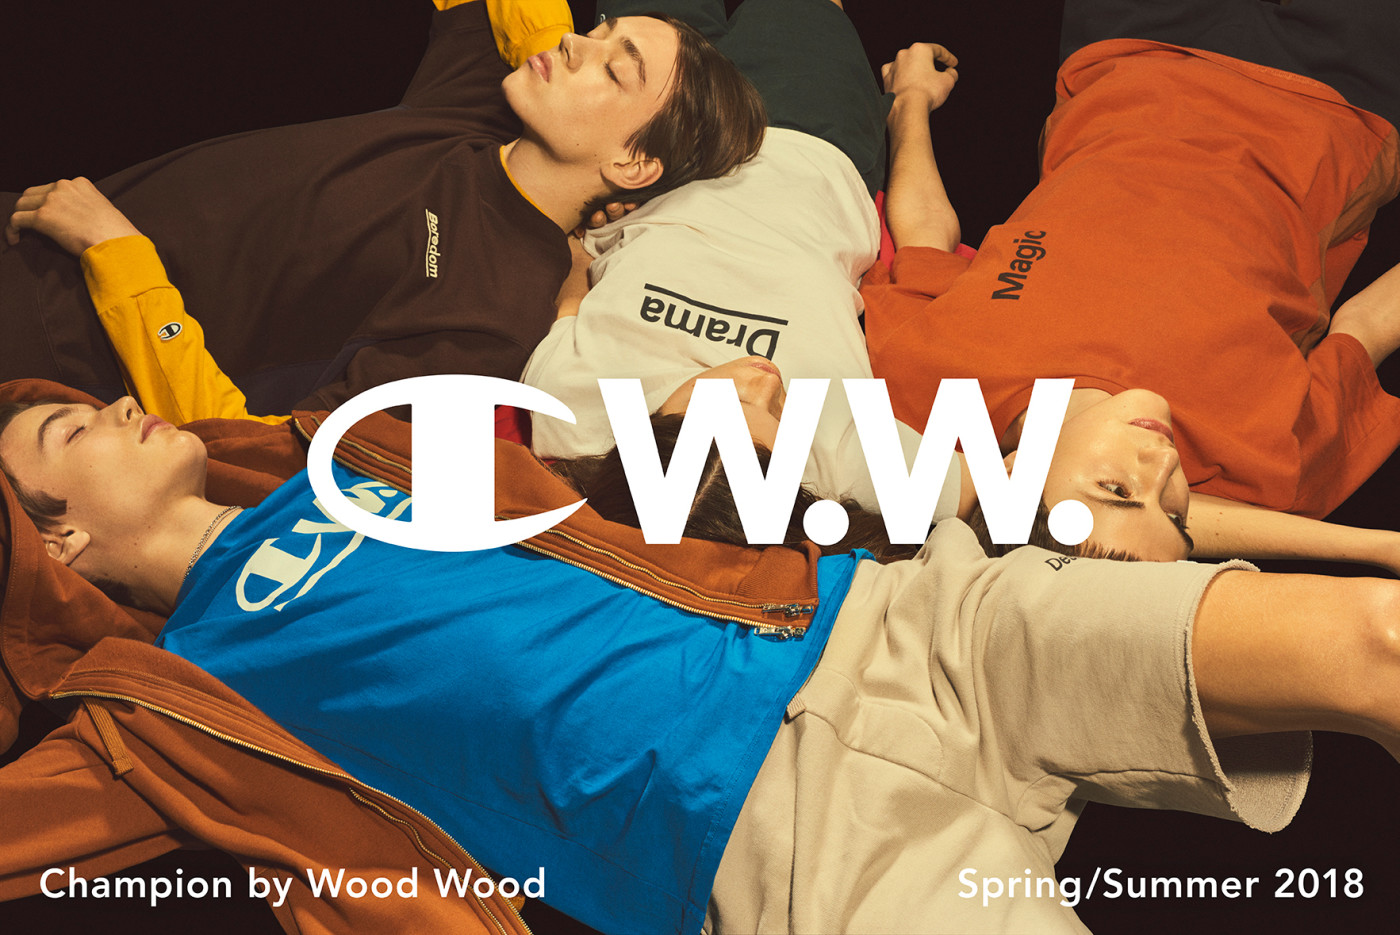 Champion by Wood SS18 Collection Provides All Your Monochrome UK